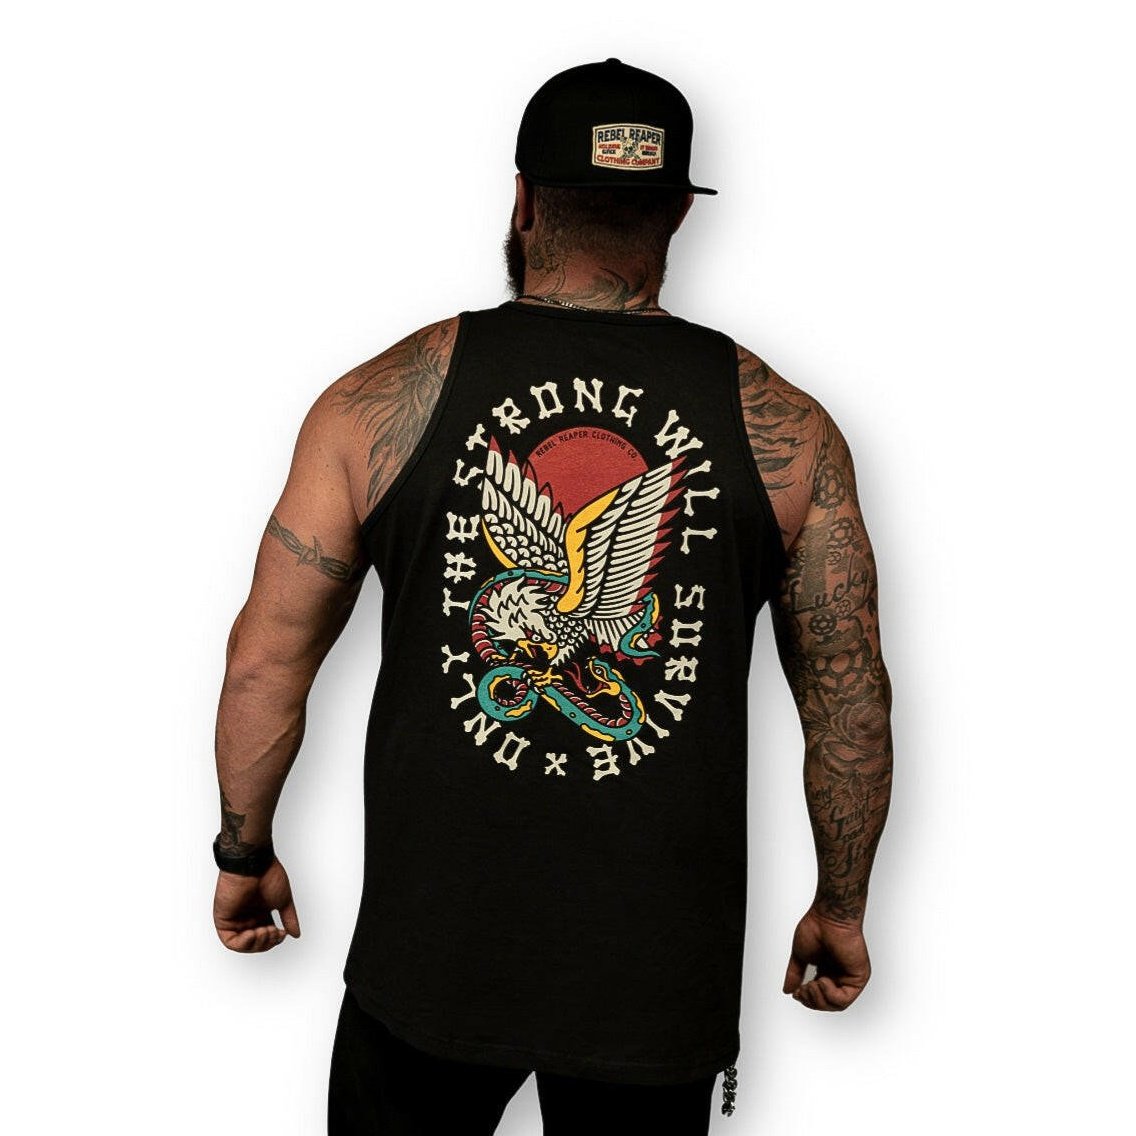 Black Only the Strong Survive Tank - Rebel Reaper Clothing Company T-Shirt